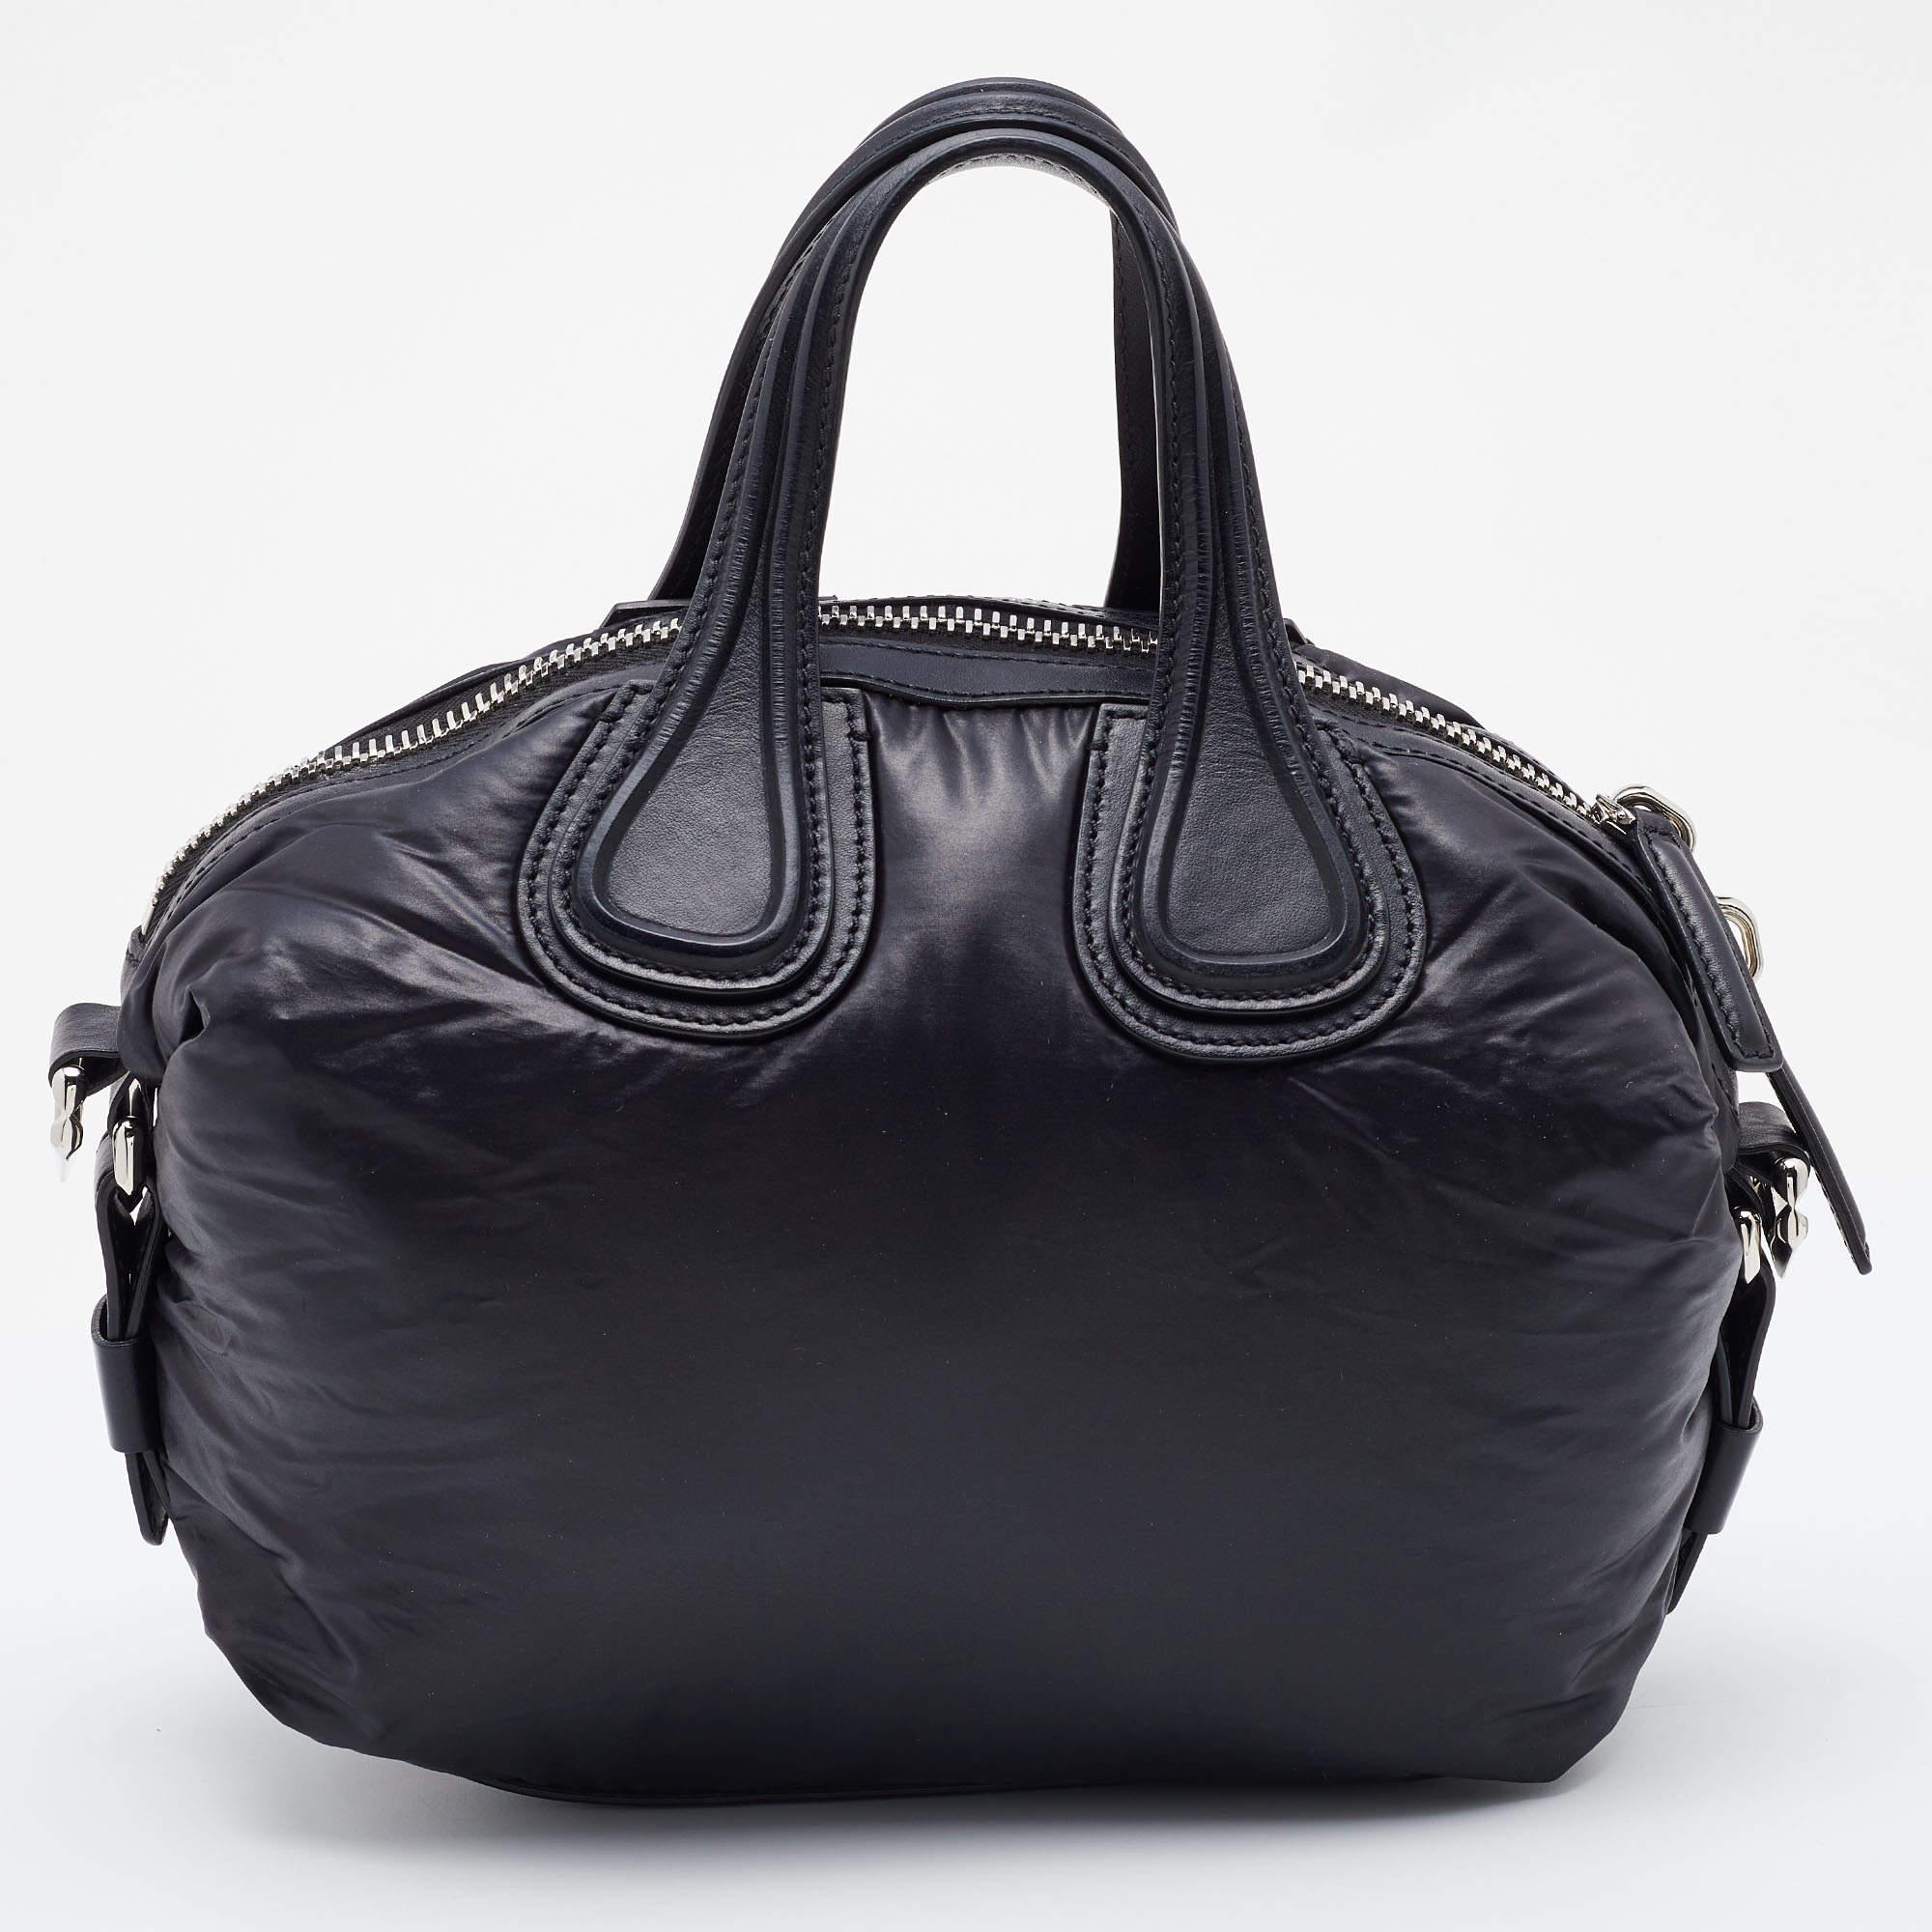 Displaying exquisite craftsmanship, this fabulous bag will certainly live up to your expectations. Featuring a chic design, it is made from luxe materials and has a roomy interior for carrying your essentials.

Includes: Original Dustbag, Detachable